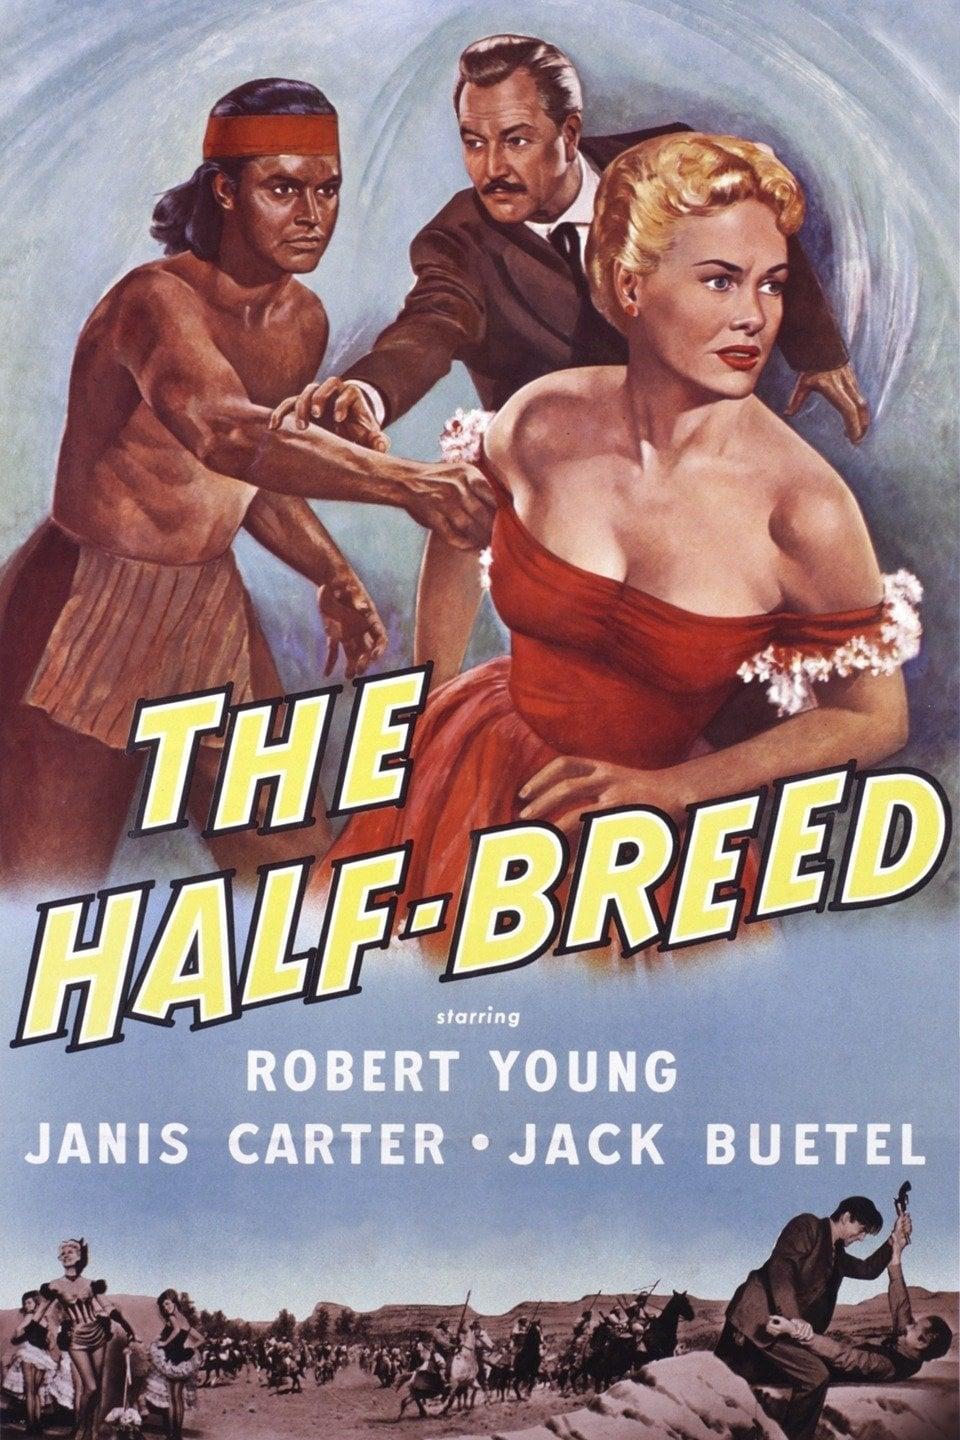 The Half-Breed poster